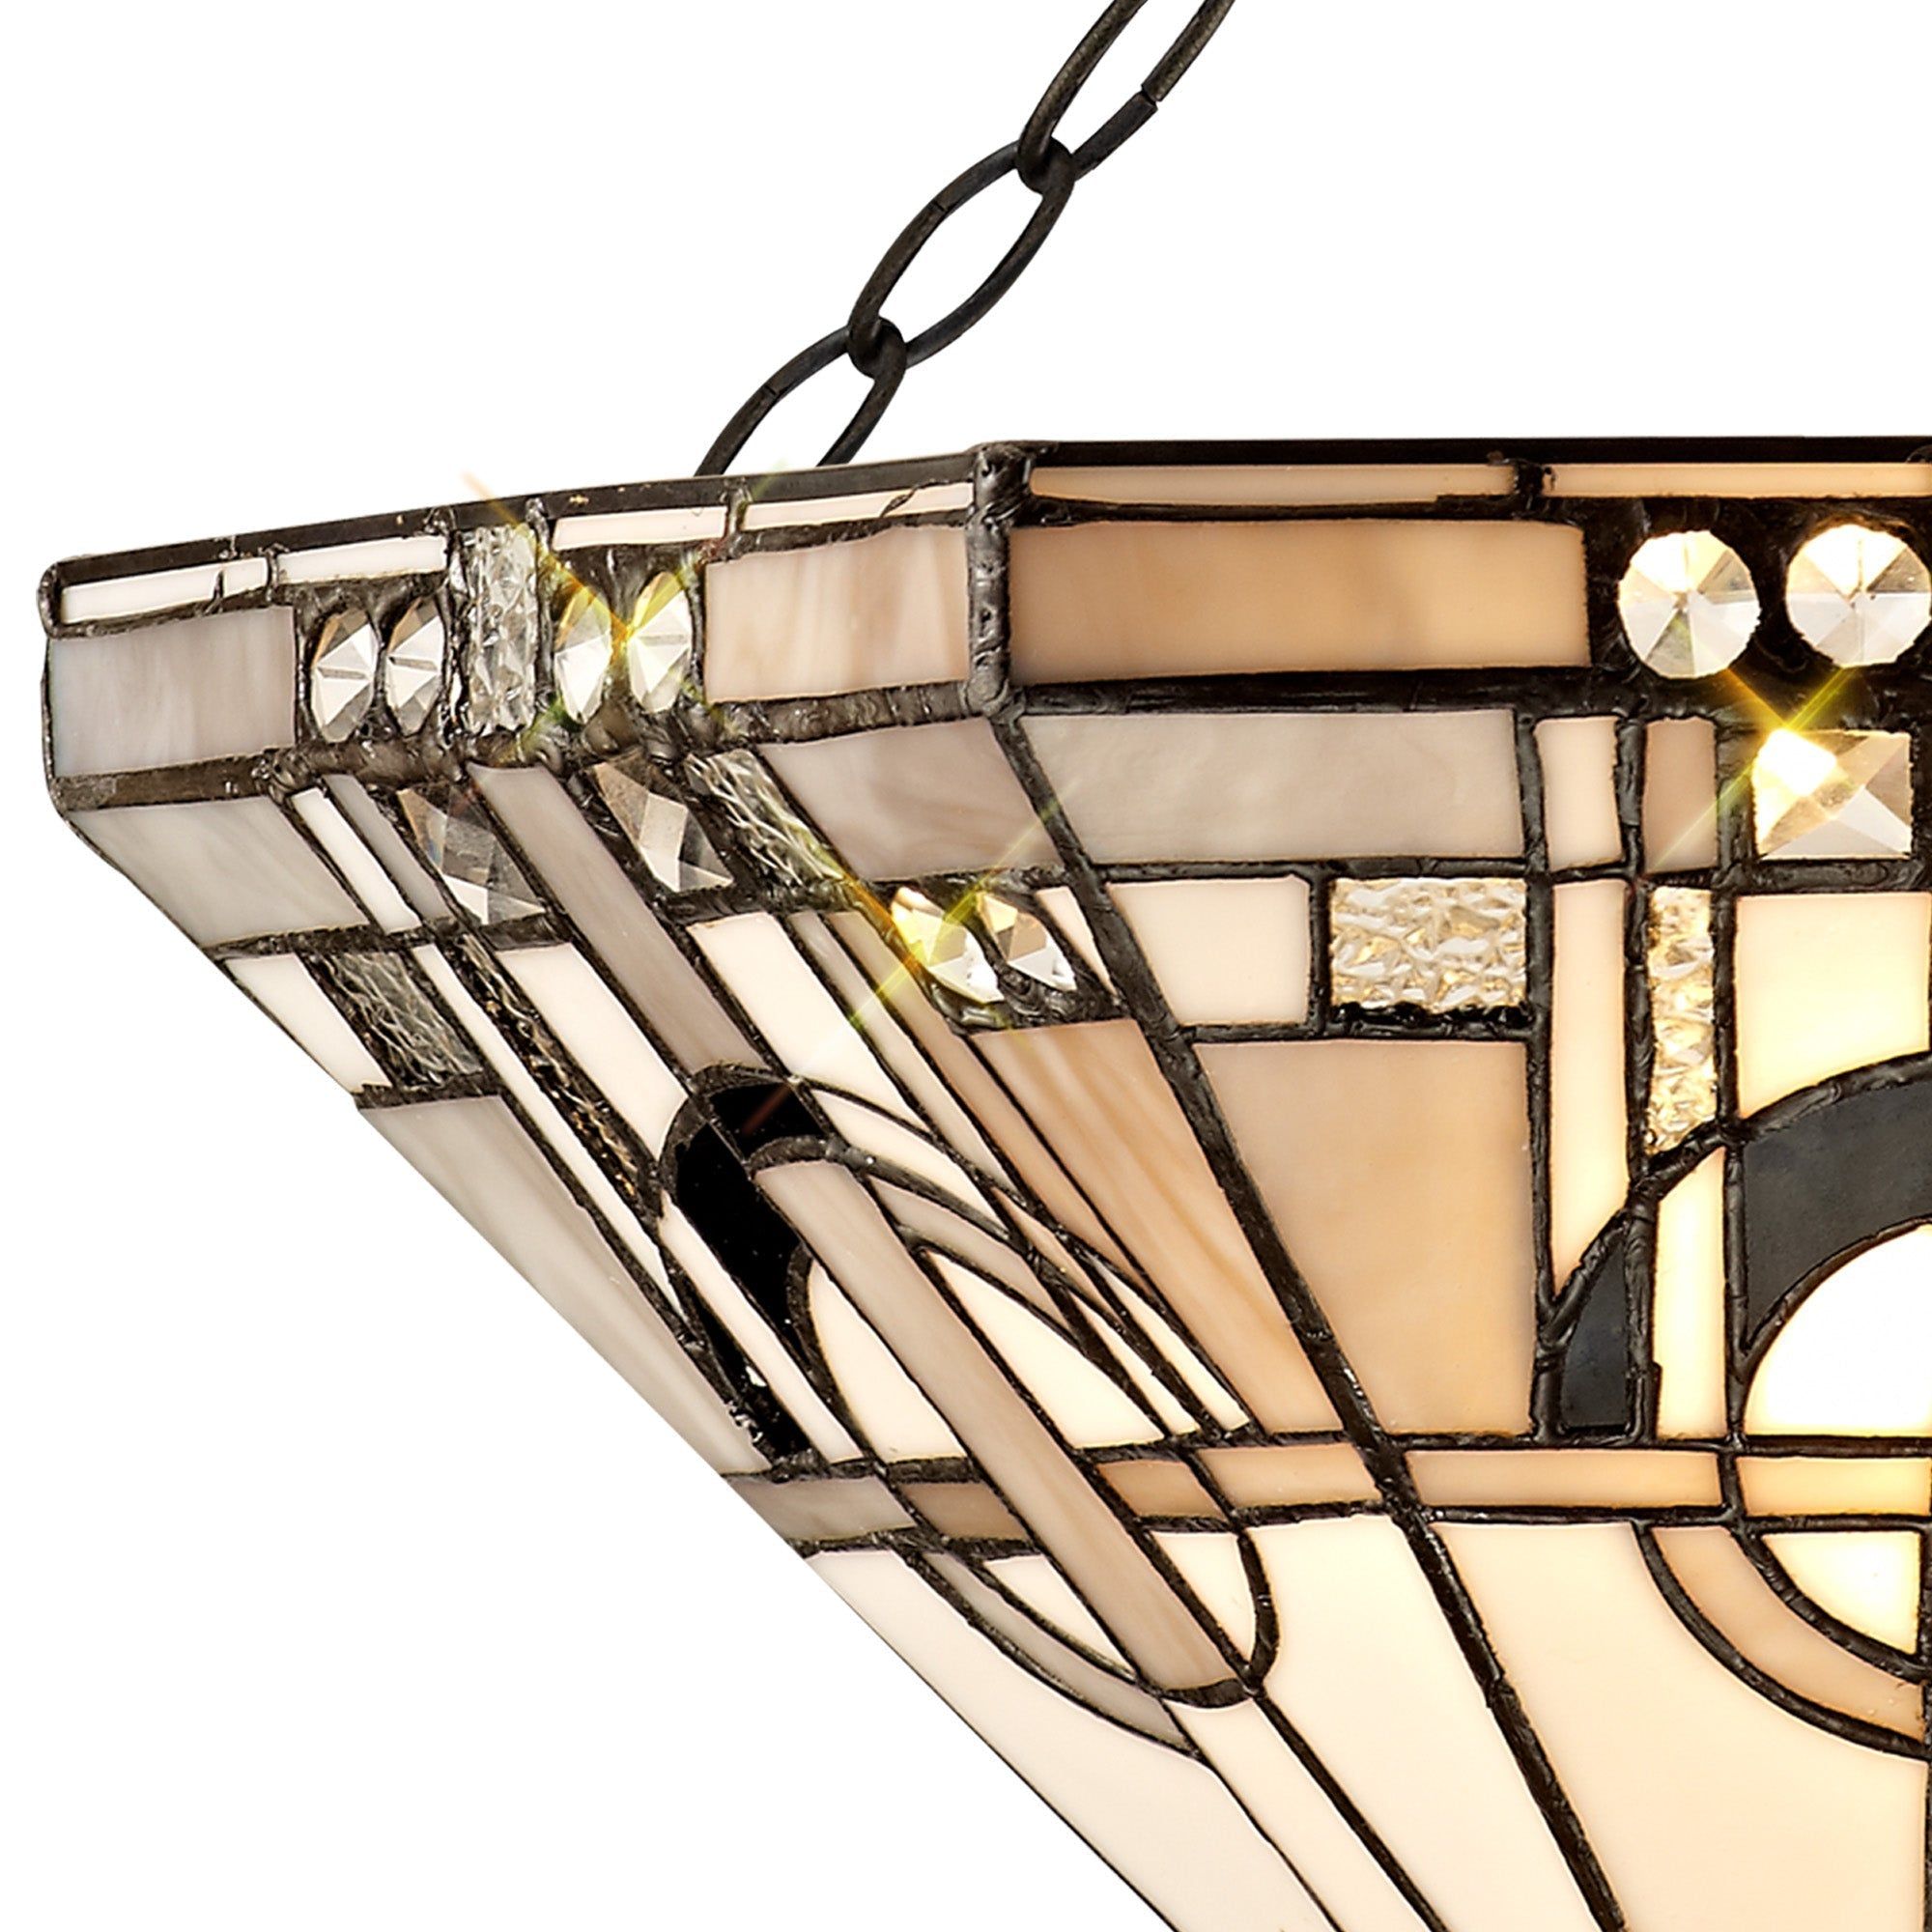 Guild 3 Light E27 Semi Ceiling With Tiffany Shade 30/40cm Shade, White/Grey/Black/Clear Crystal/Aged Antique Brass